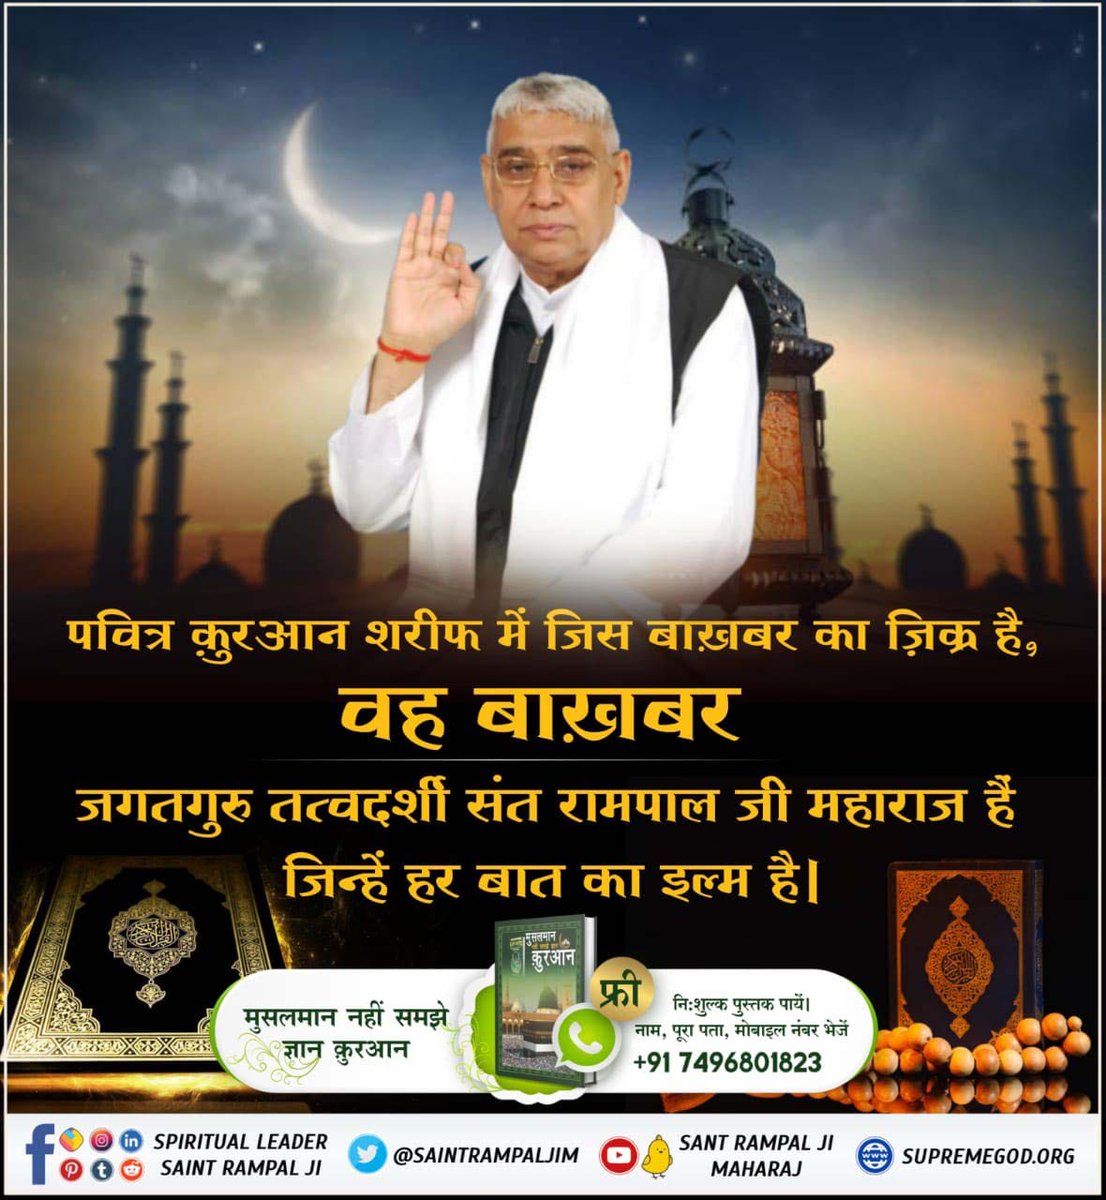 #कादर_अल्लाह_कबीर
Today, Baakhabar is present on Earth. Who is He, and where is He?

To know, Must read the sacred book Musalman Nahi Samjhe Gyan Quran
Baakhabar Sant Rampal Ji
#सत_भक्ति_संदेश़
#likeallmypics
#thursdaymorning